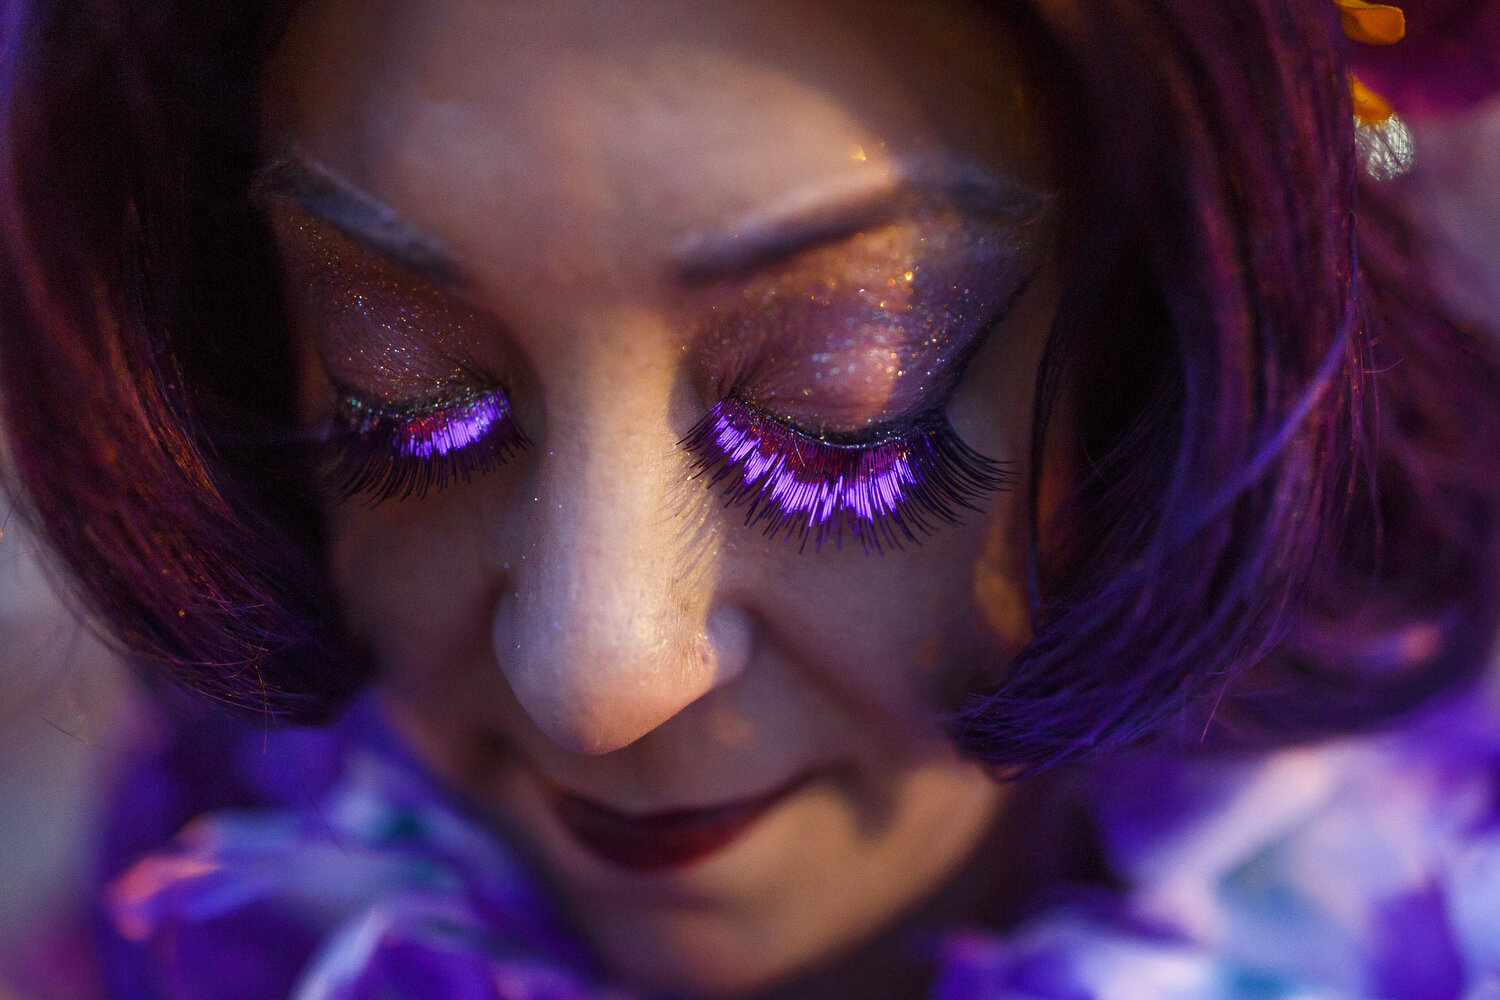  Lori Glenn, of Durham, wears purple eyelashes to complete her outfit as queen of the Mardi Gras celebration in downtown Durham. 